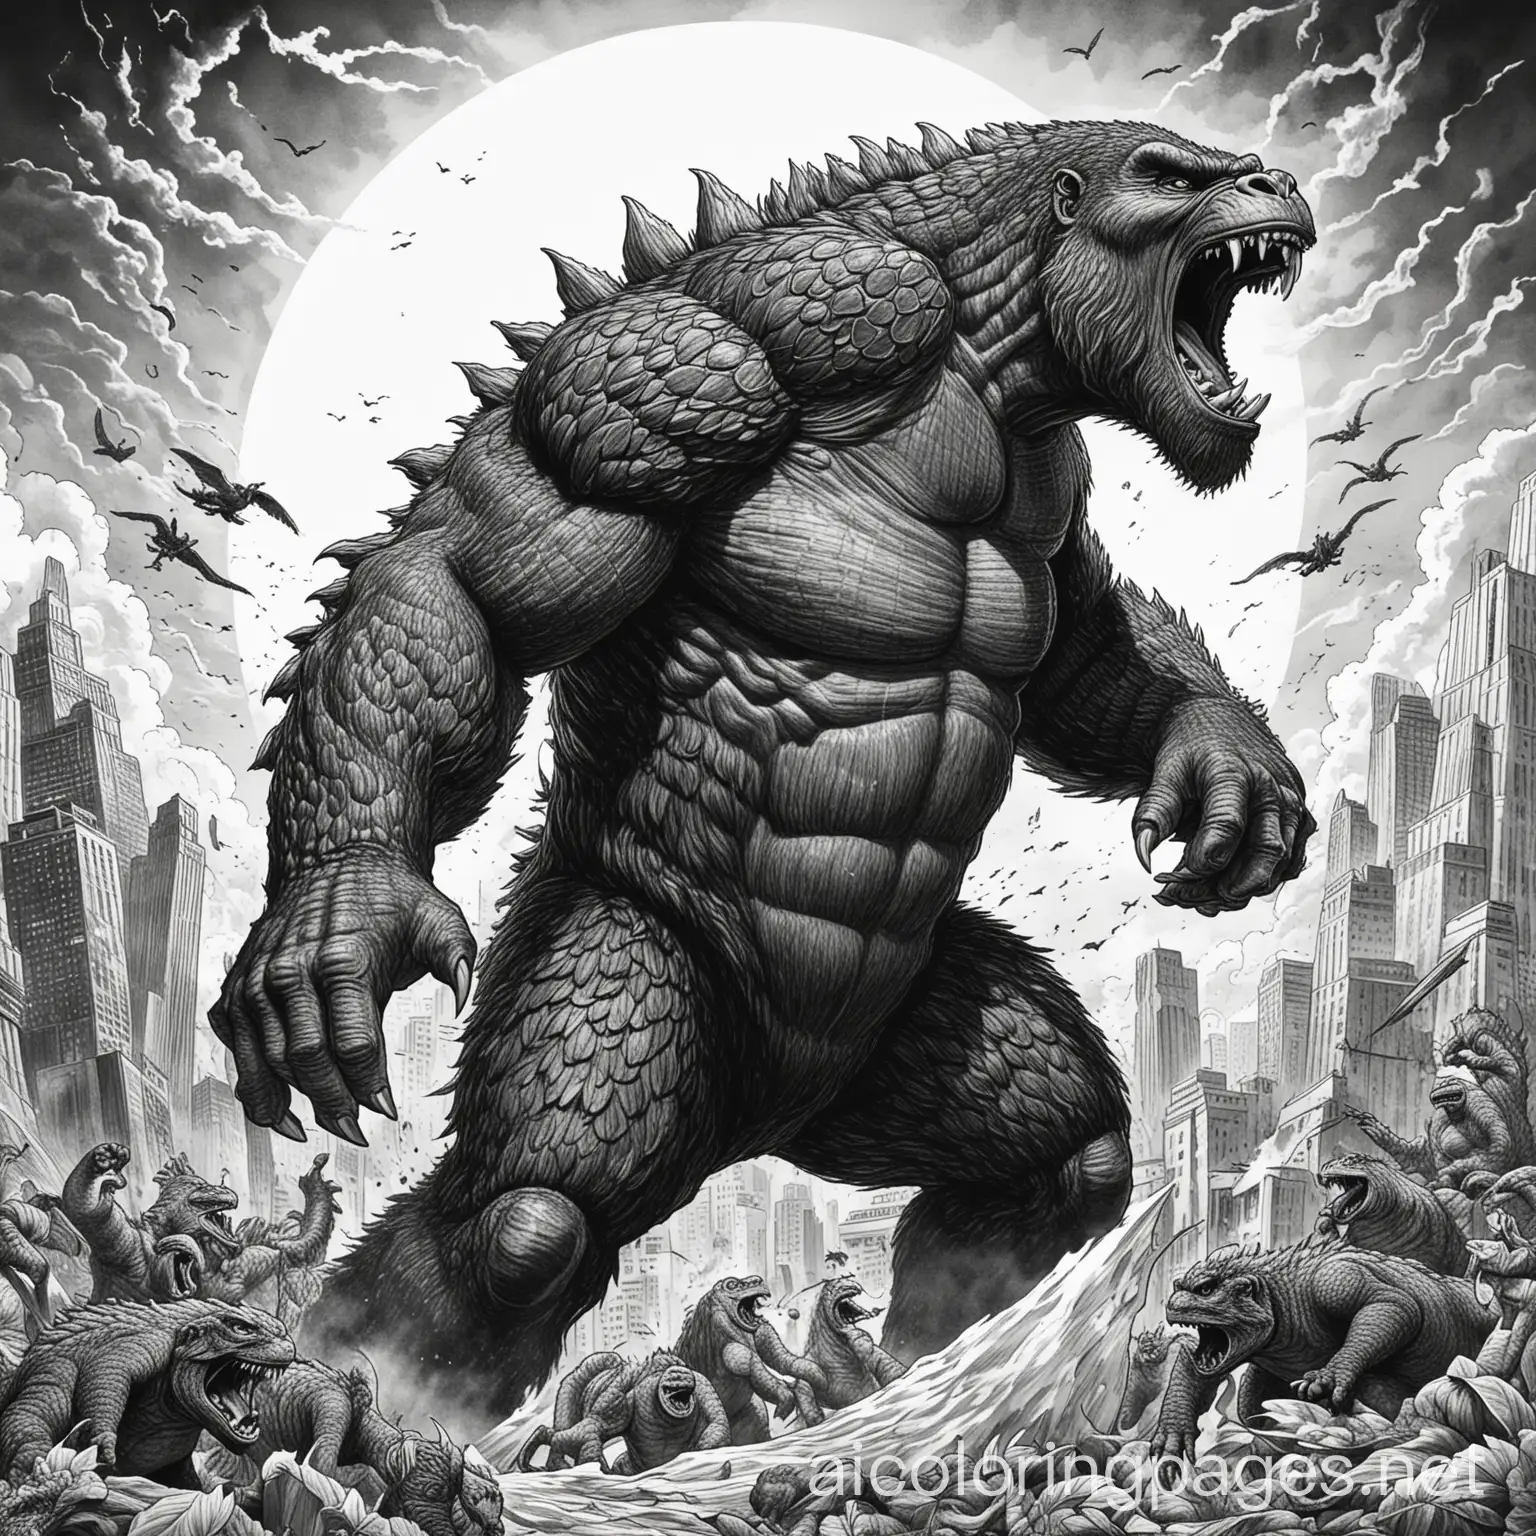 king kong vs godzilla, Coloring Page, black and white, line art, white background, Simplicity, Ample White Space. The background of the coloring page is plain white to make it easy for young children to color within the lines. The outlines of all the subjects are easy to distinguish, making it simple for kids to color without too much difficulty